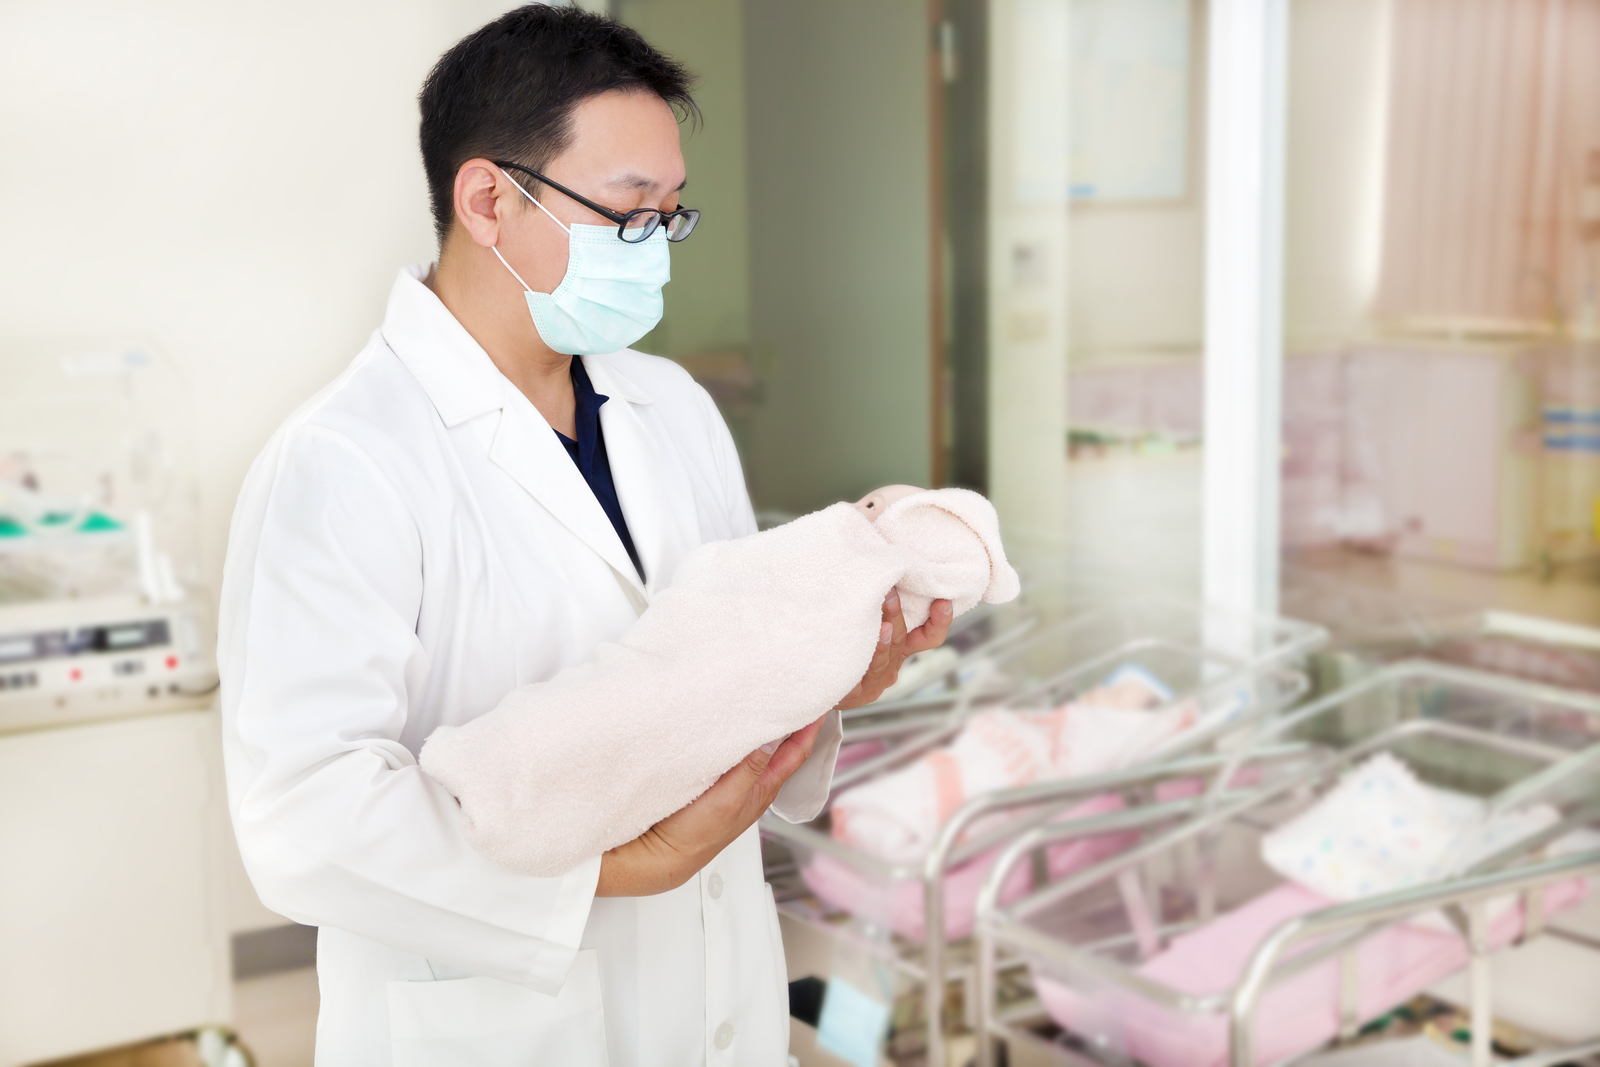 What are the top medical errors that cause birth injuries?